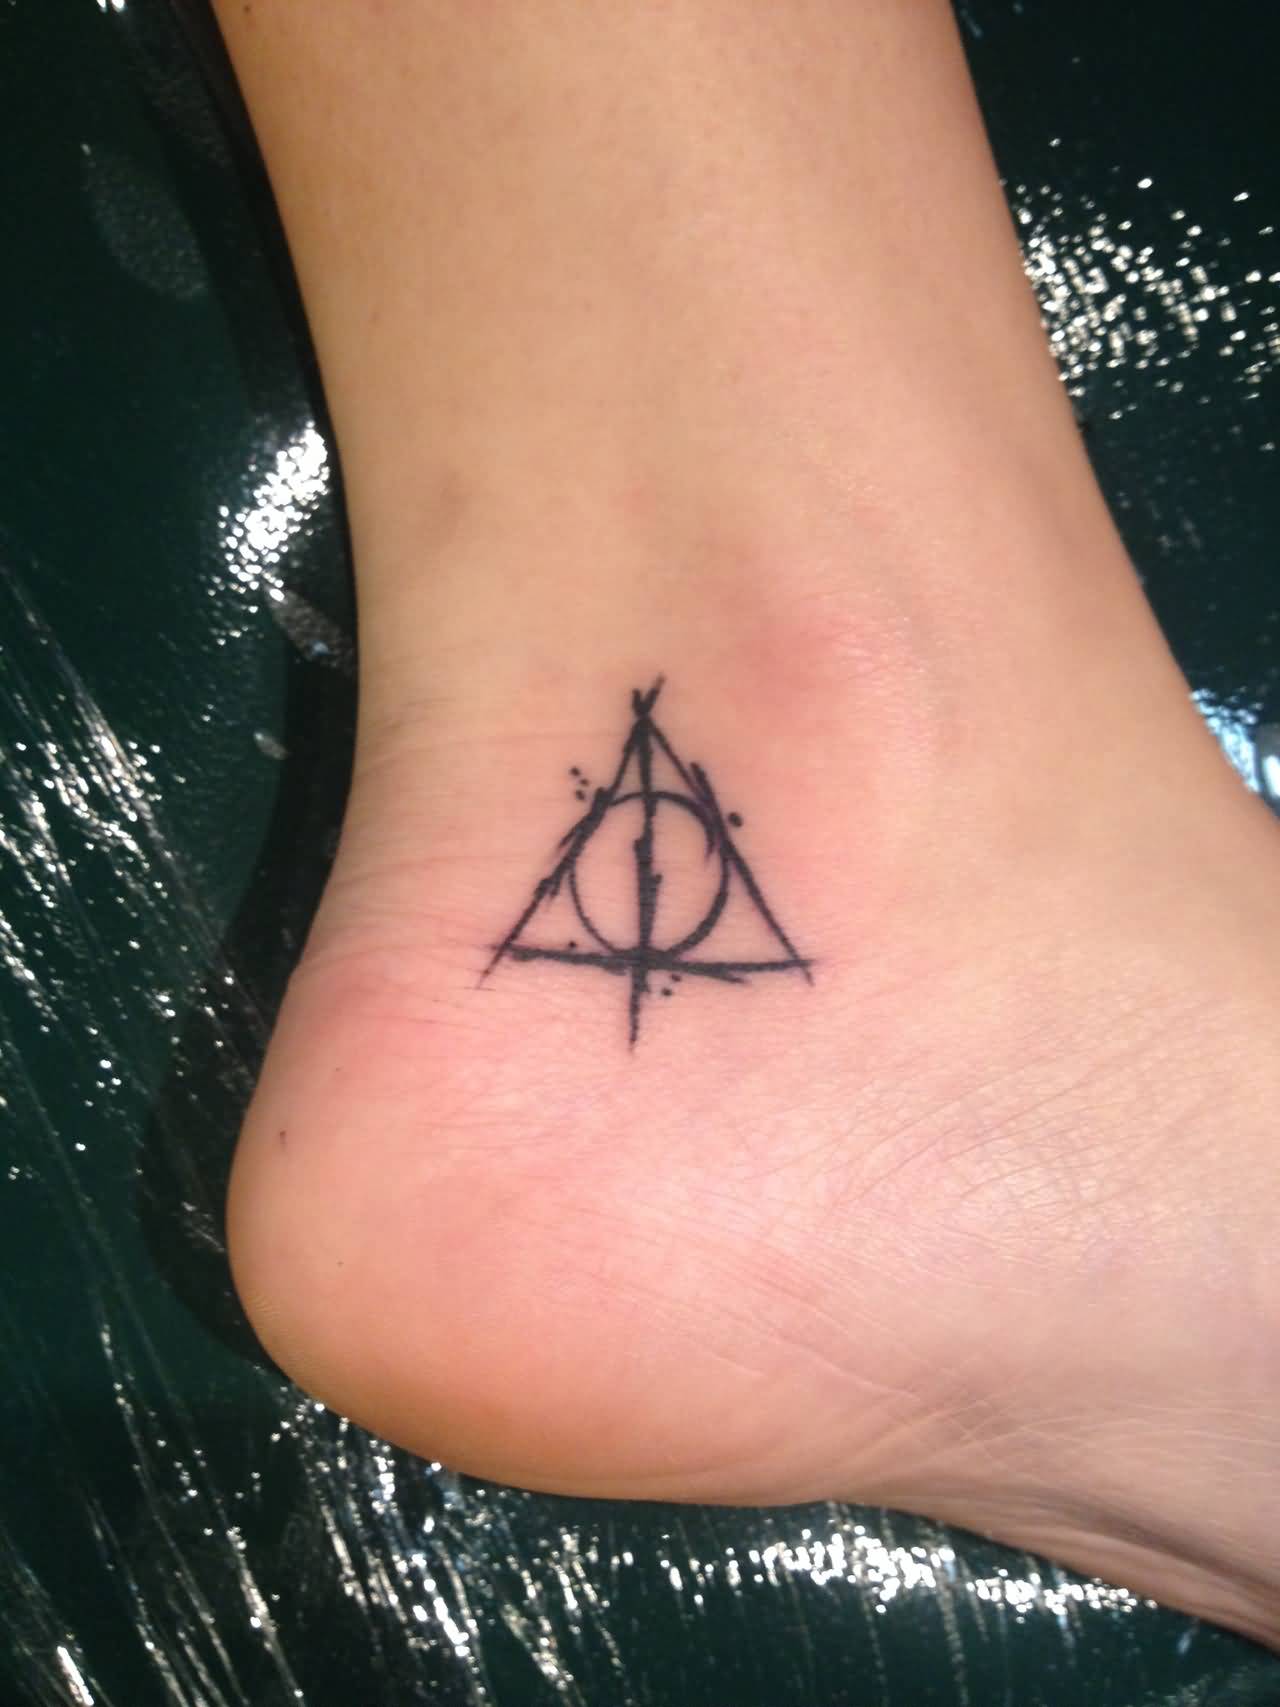 10+ Hallows Tattoos On Ankle